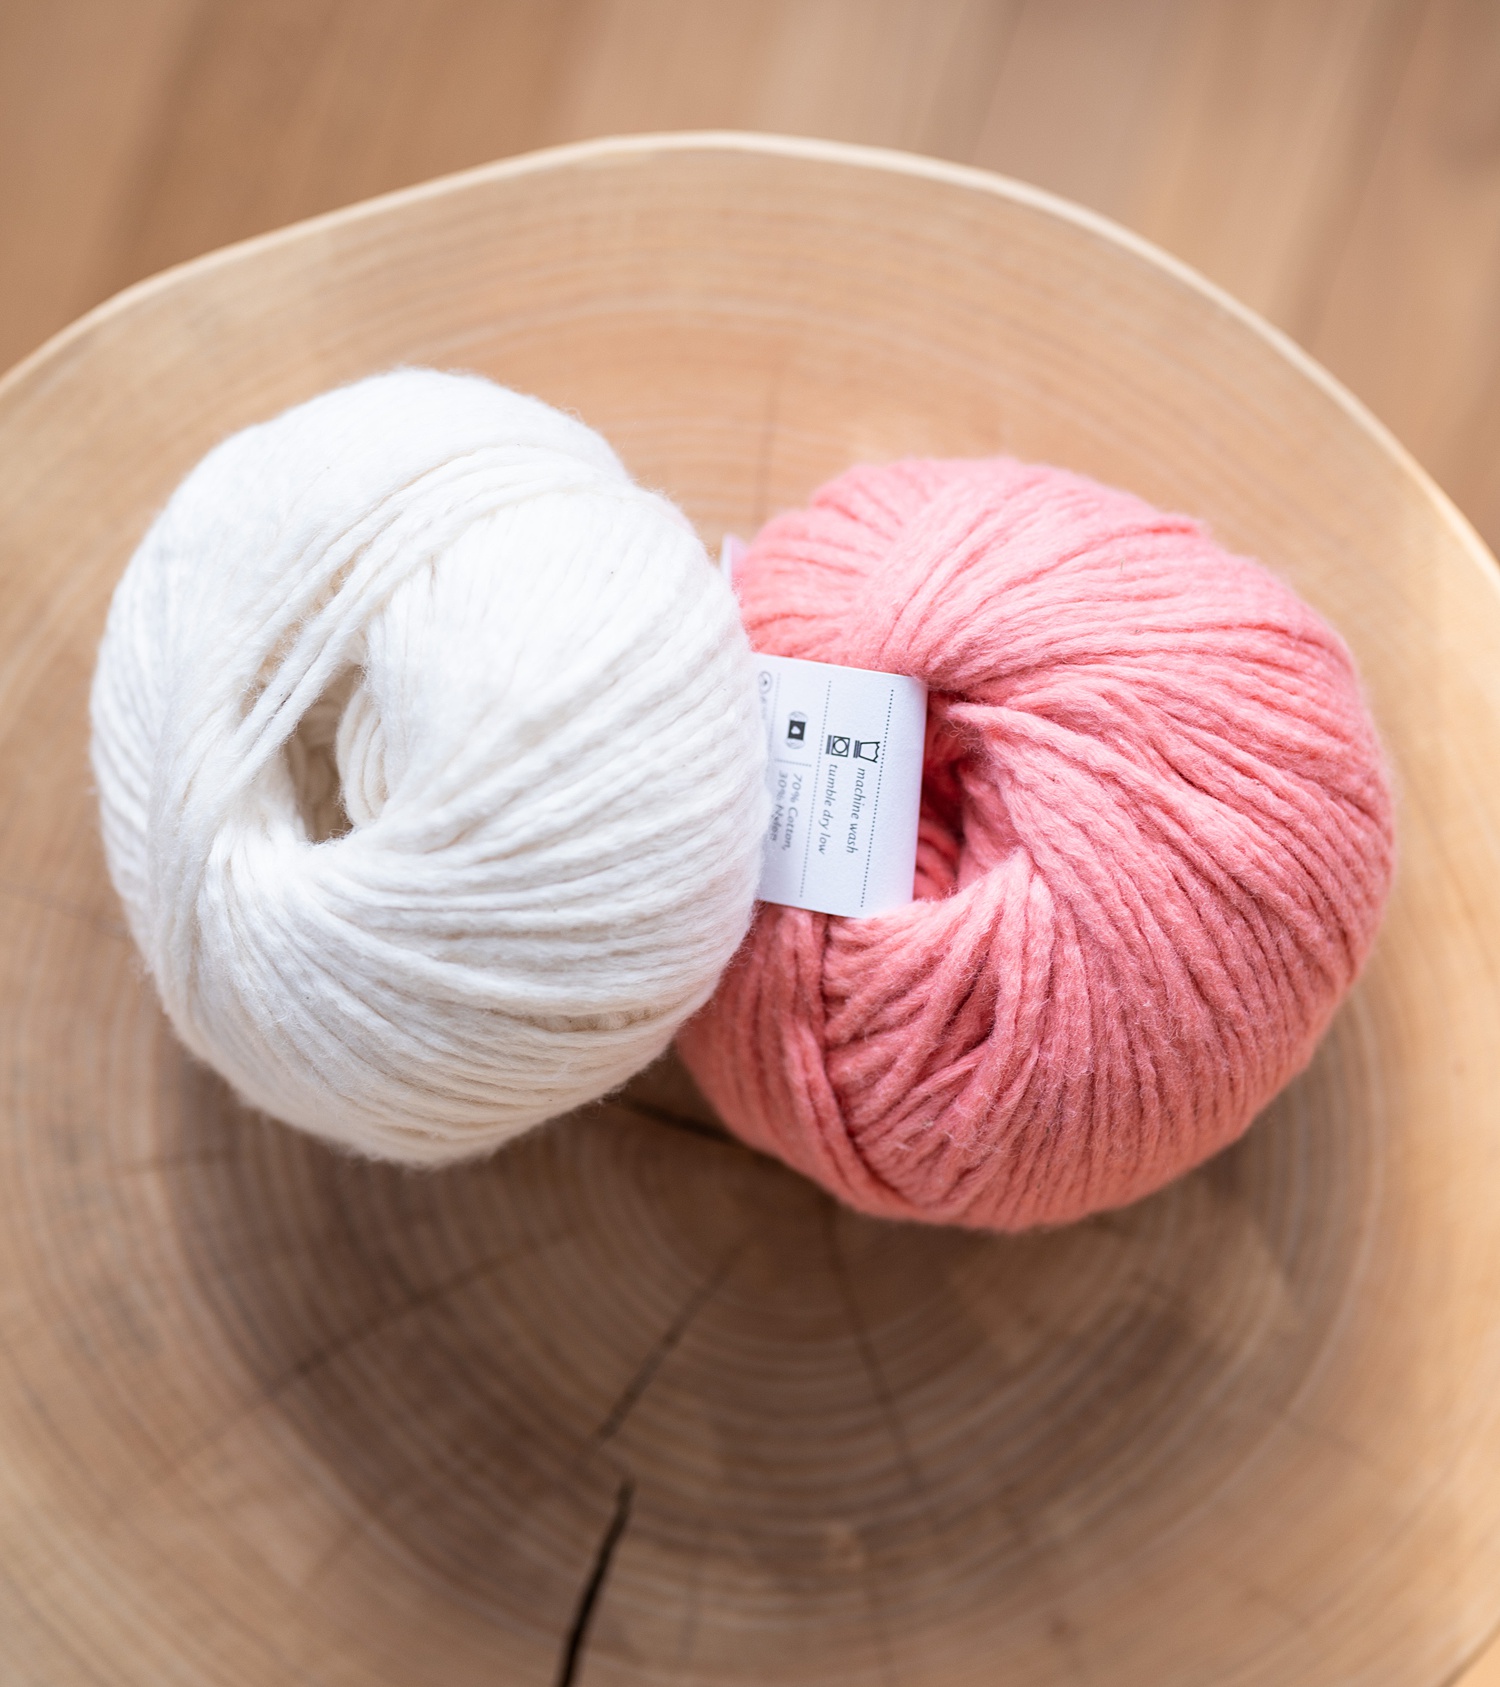 Yarn Review: New Yarns To Try From WeCrochet + Crochet Pattern